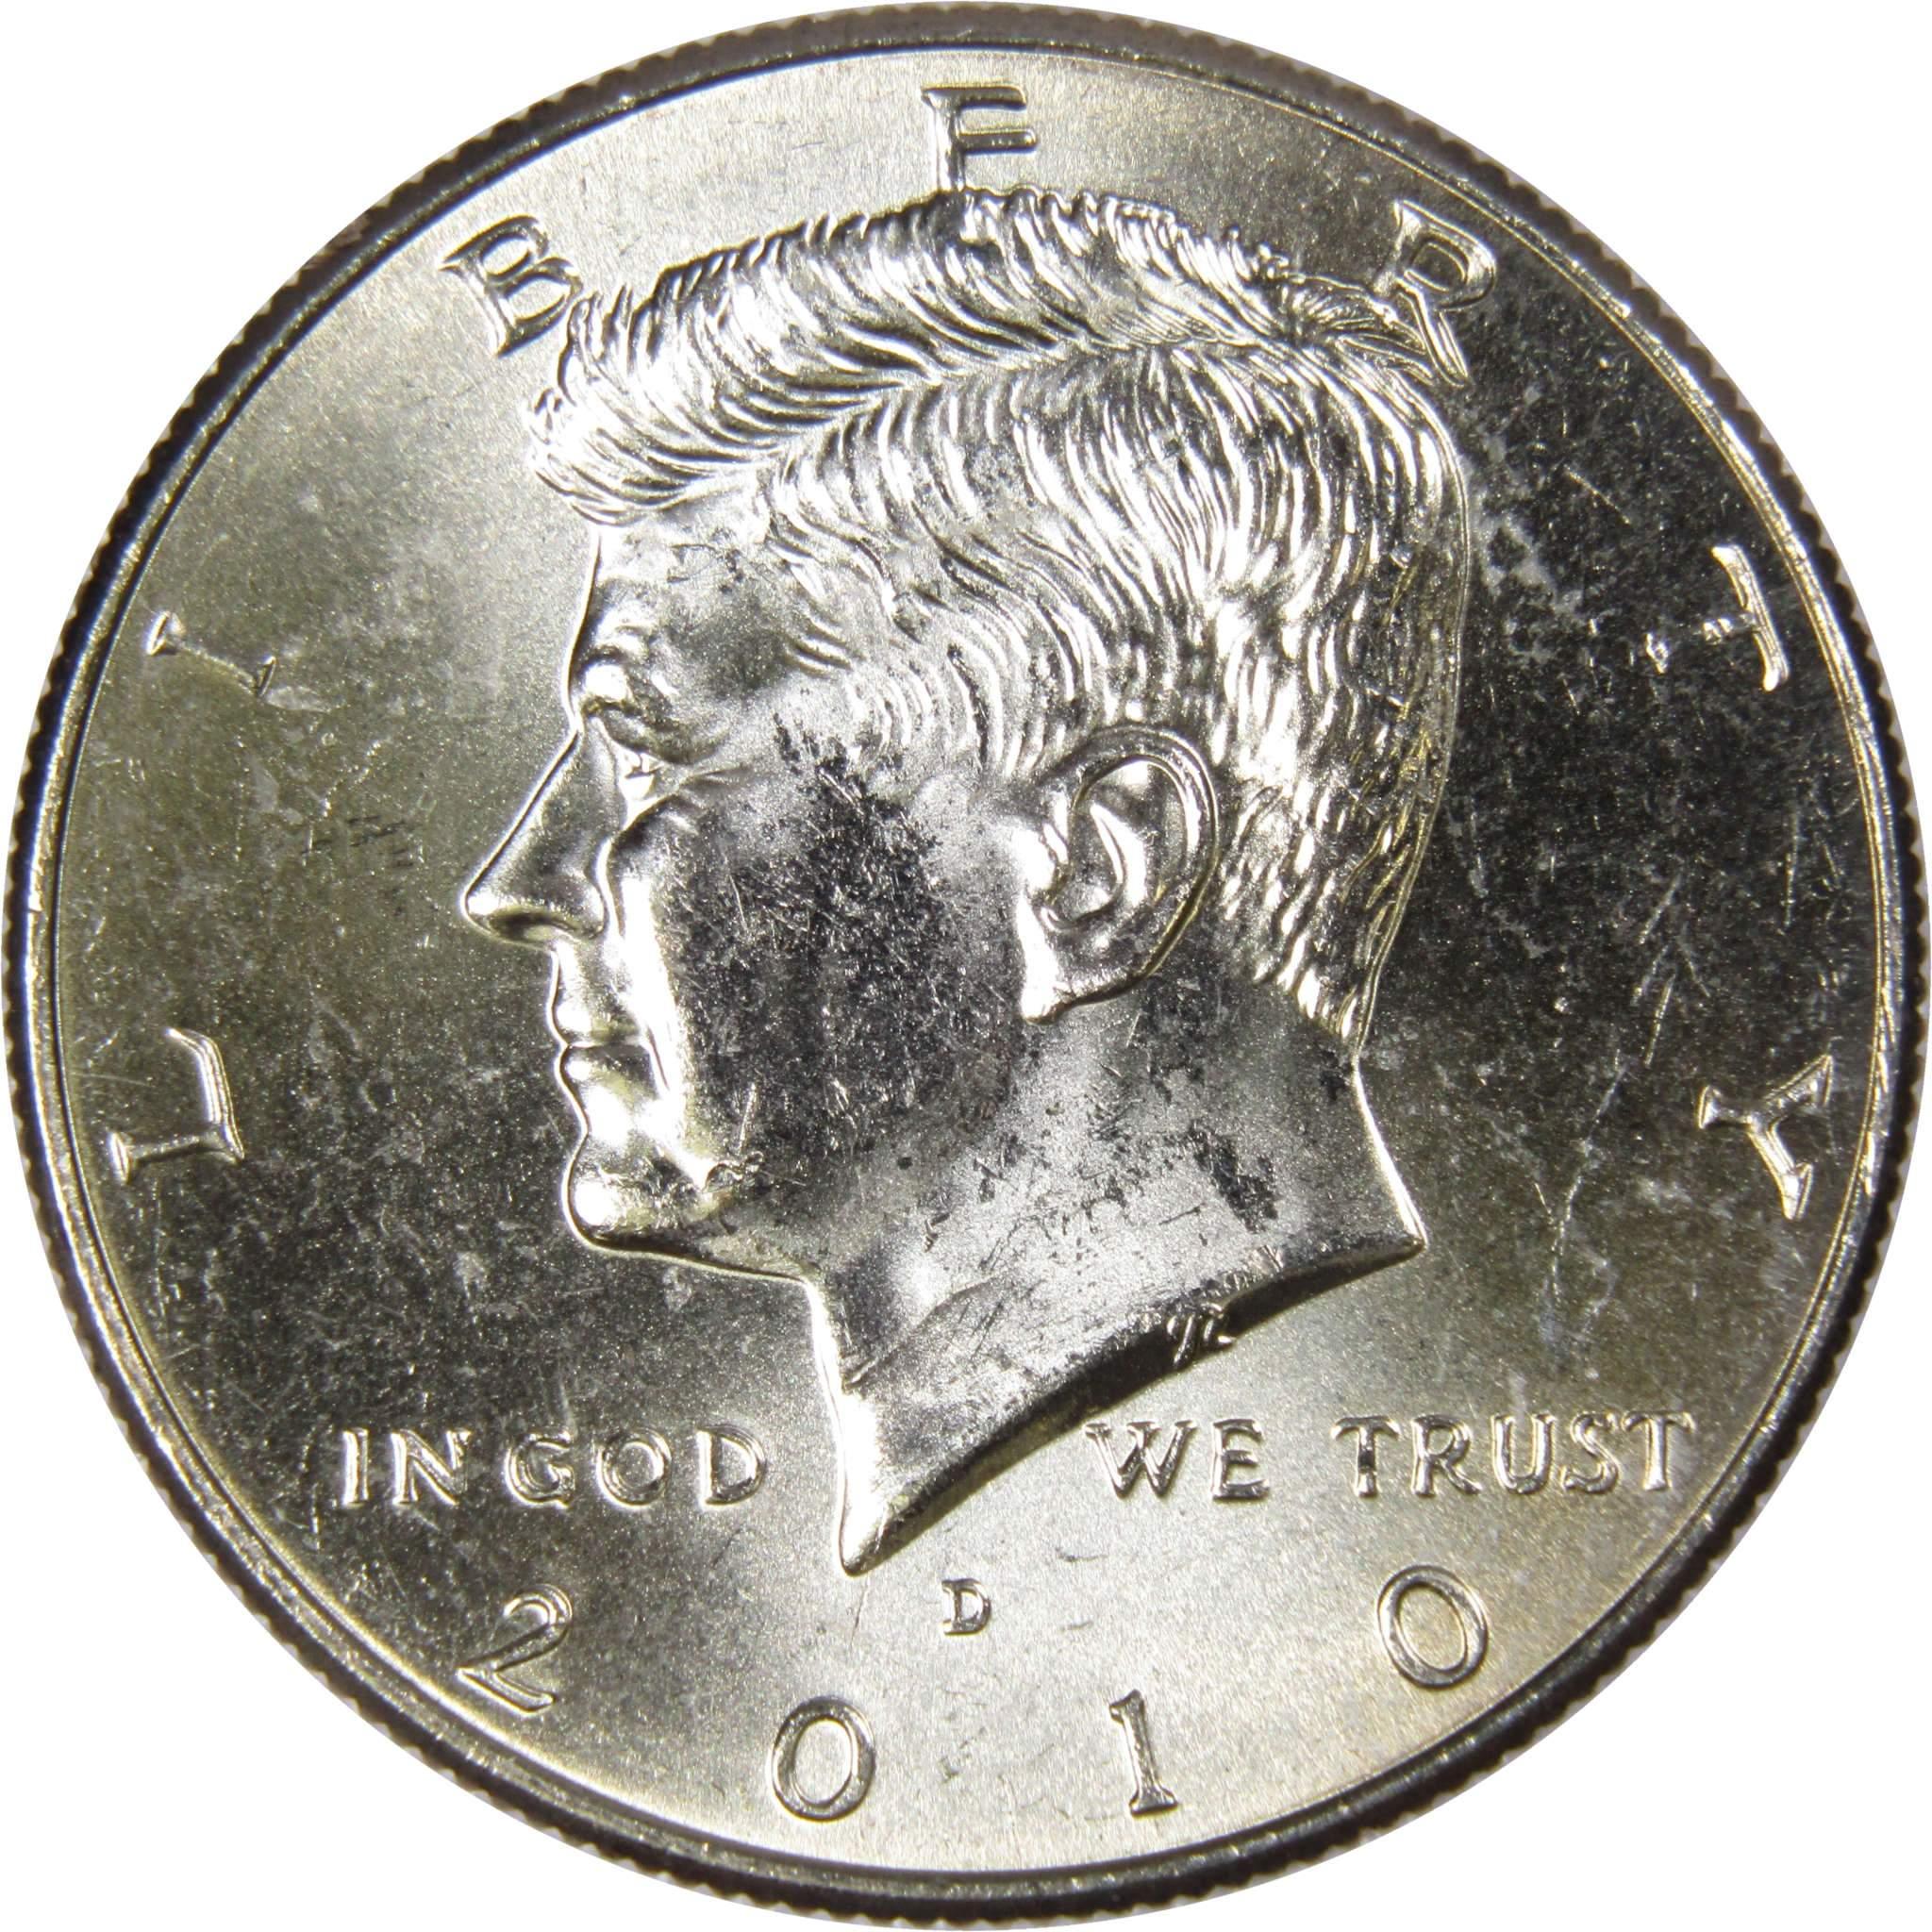 2010 D Kennedy Half Dollar BU Uncirculated Mint State 50c US Coin Collectible